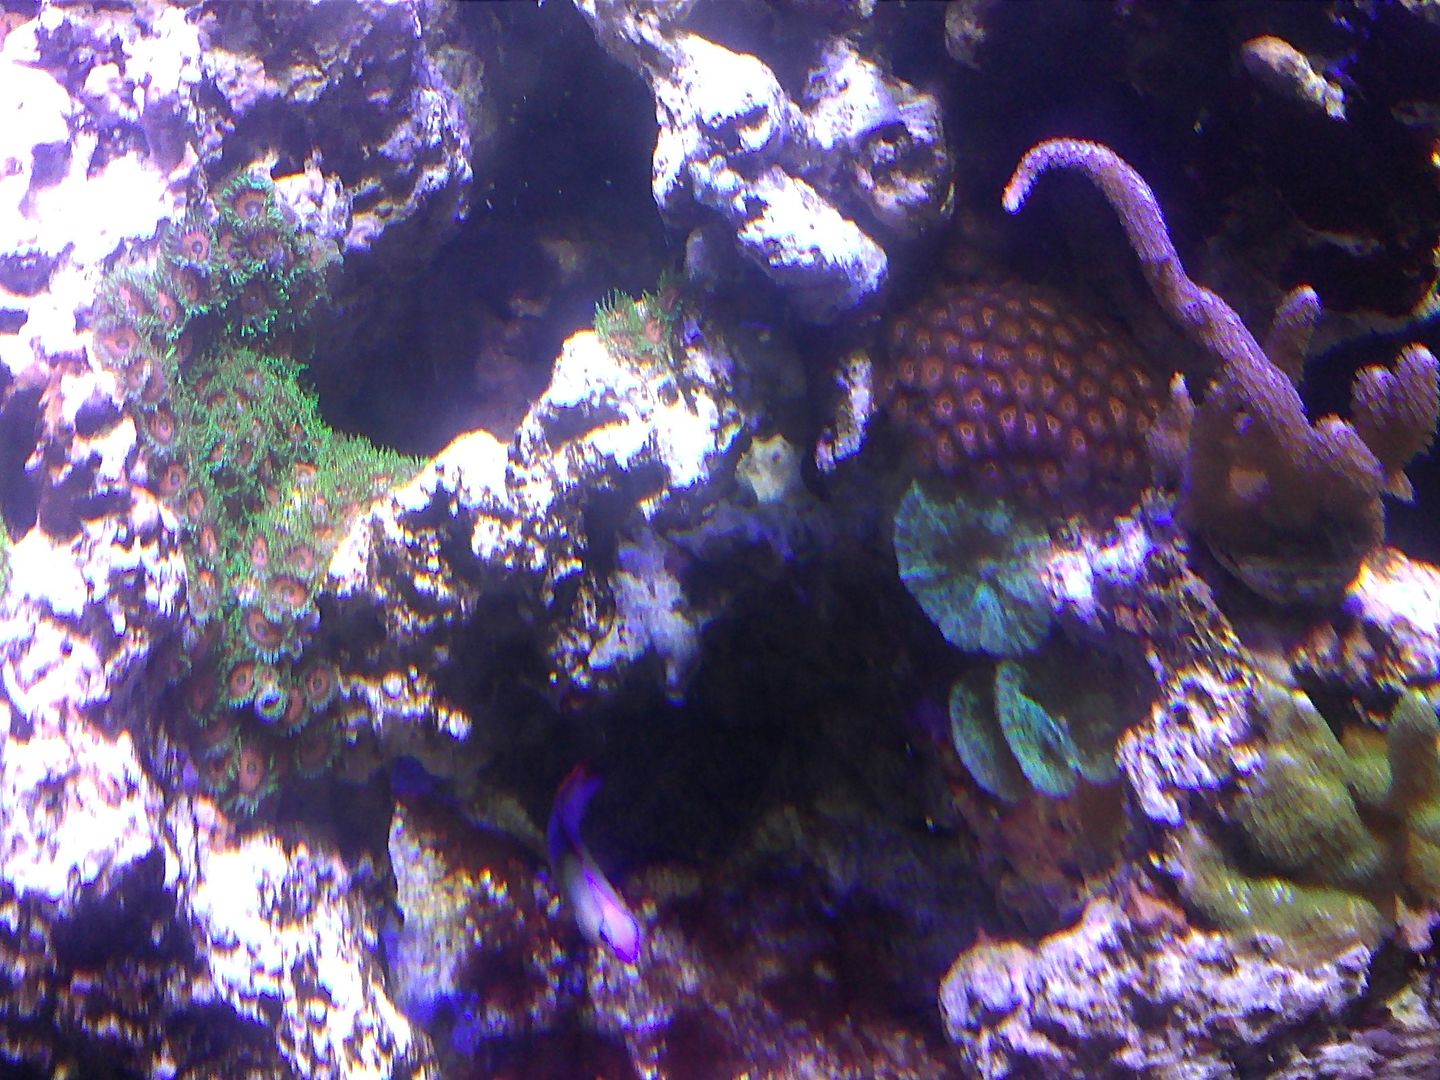 IMG526 zps56eb6a96 - Selling All Corals in 24g $200 as a package